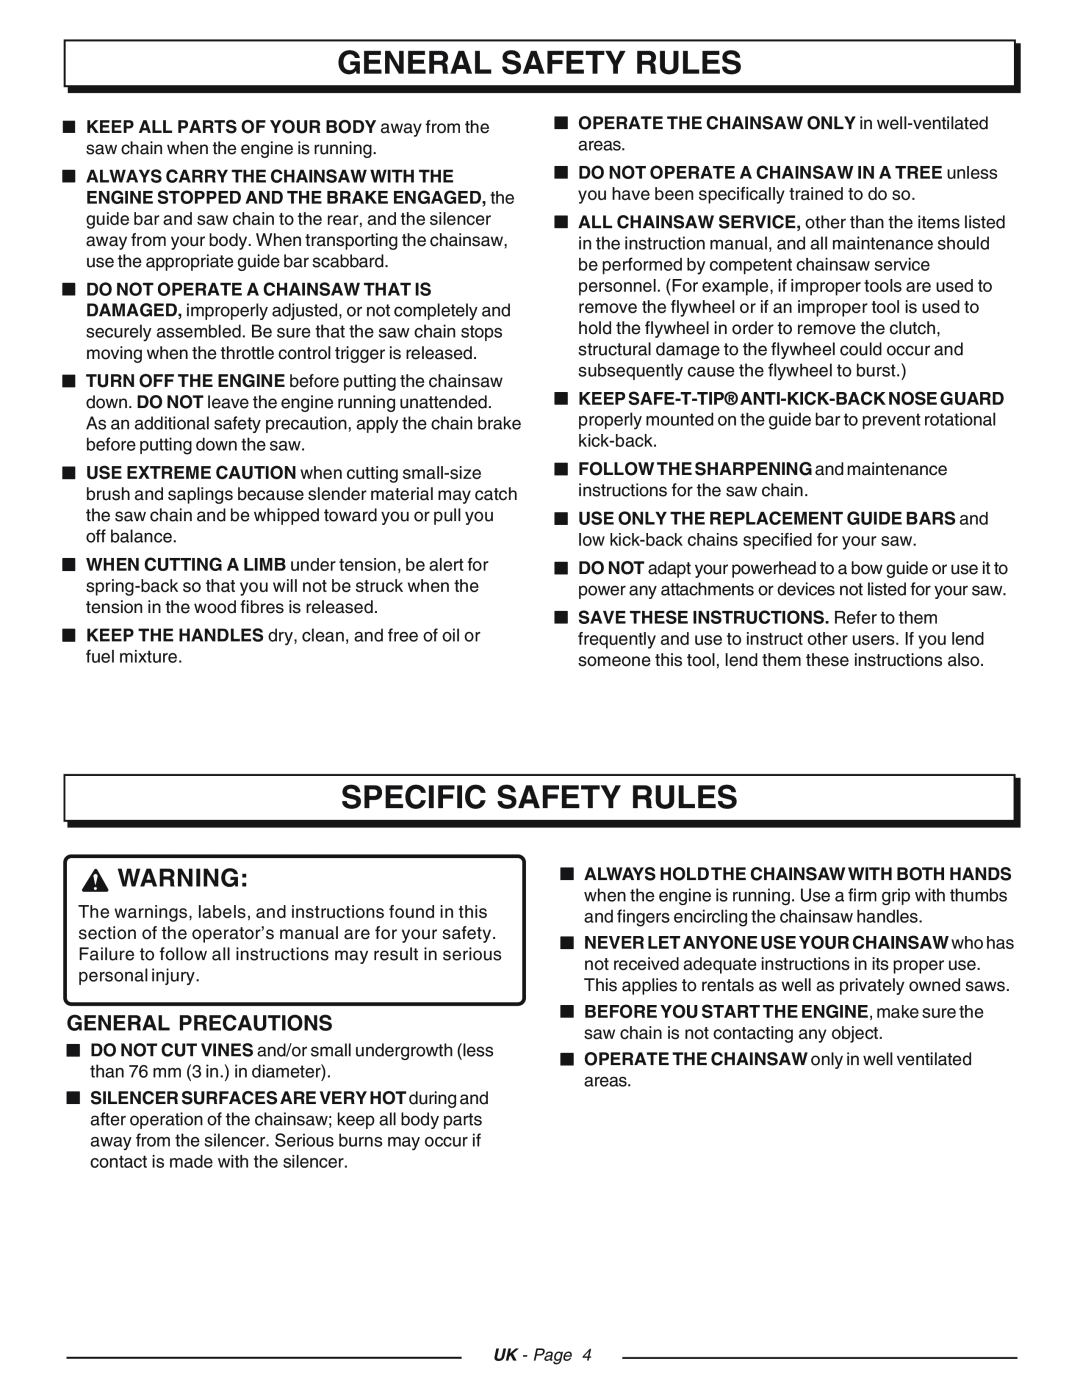 Homelite CSP4518 - UT74125D manual Specific Safety Rules, General Precautions, General Safety Rules, UK - Page 